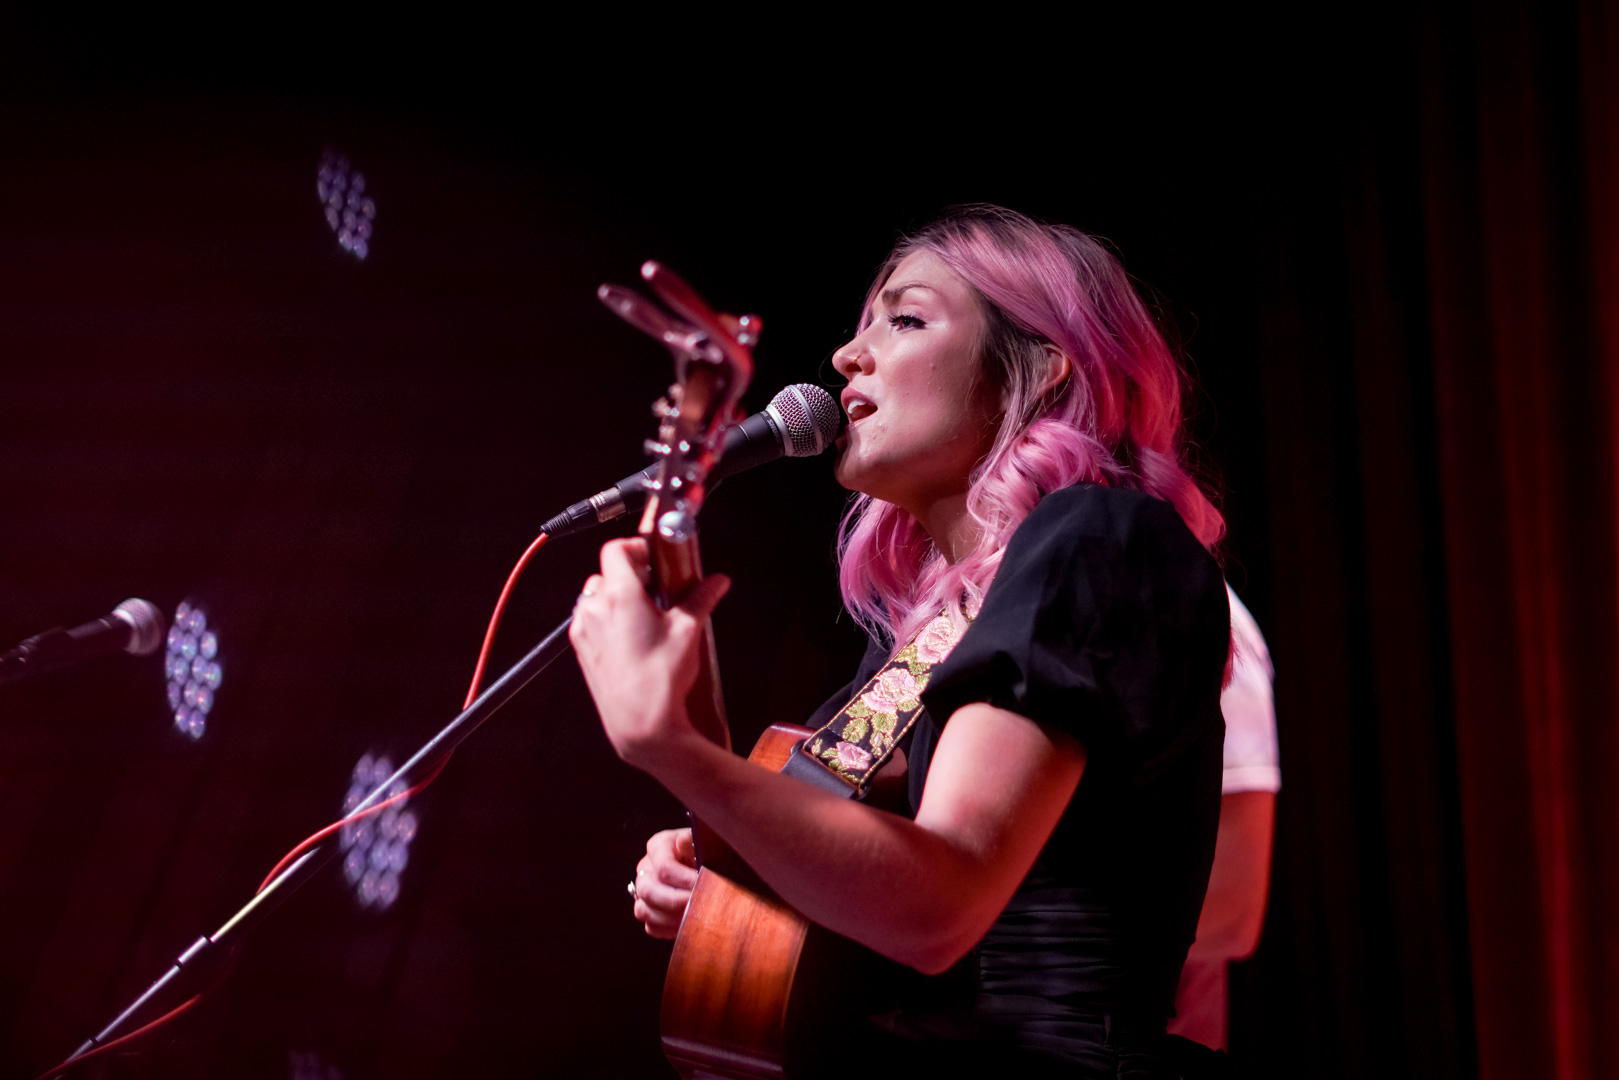 A woman with pink hair playing an acoustic guitar and sings on stage